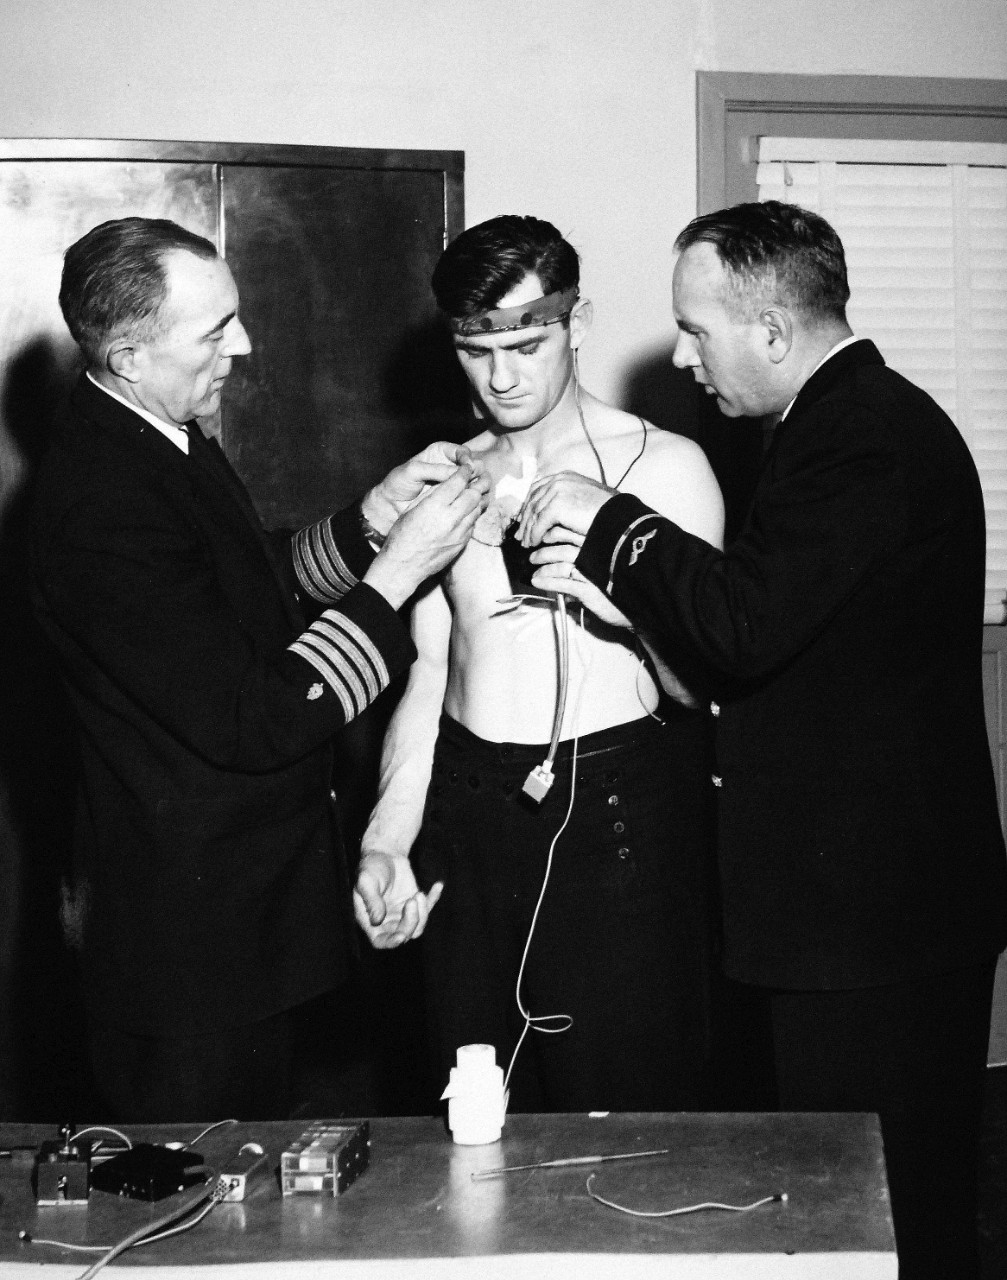 330-PS-8850-2:  U.S. Navy Conducts Physical Studies By Telephone.  Captain Norman Les Barr, MC, USN, Hospitalman Ralph Form, USN, attaching electrodes Electrician’s Mate First Class A.L. Monroe, USN, March 21, 1958.  Official Department of Defense photograph, now in the collection of the National Archives.   